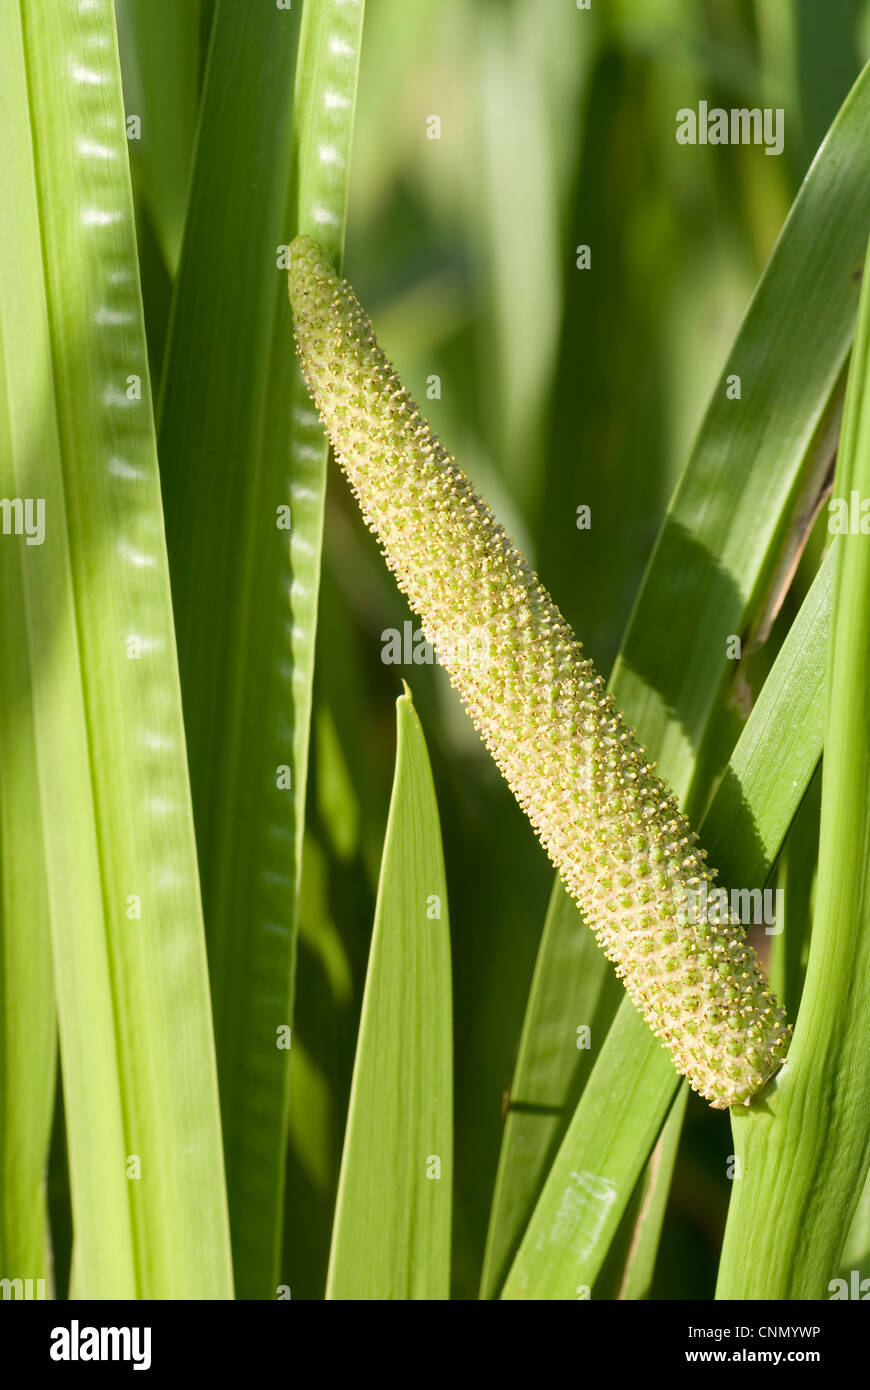 leaf calamus with inflorescence grow in water Stock Photo